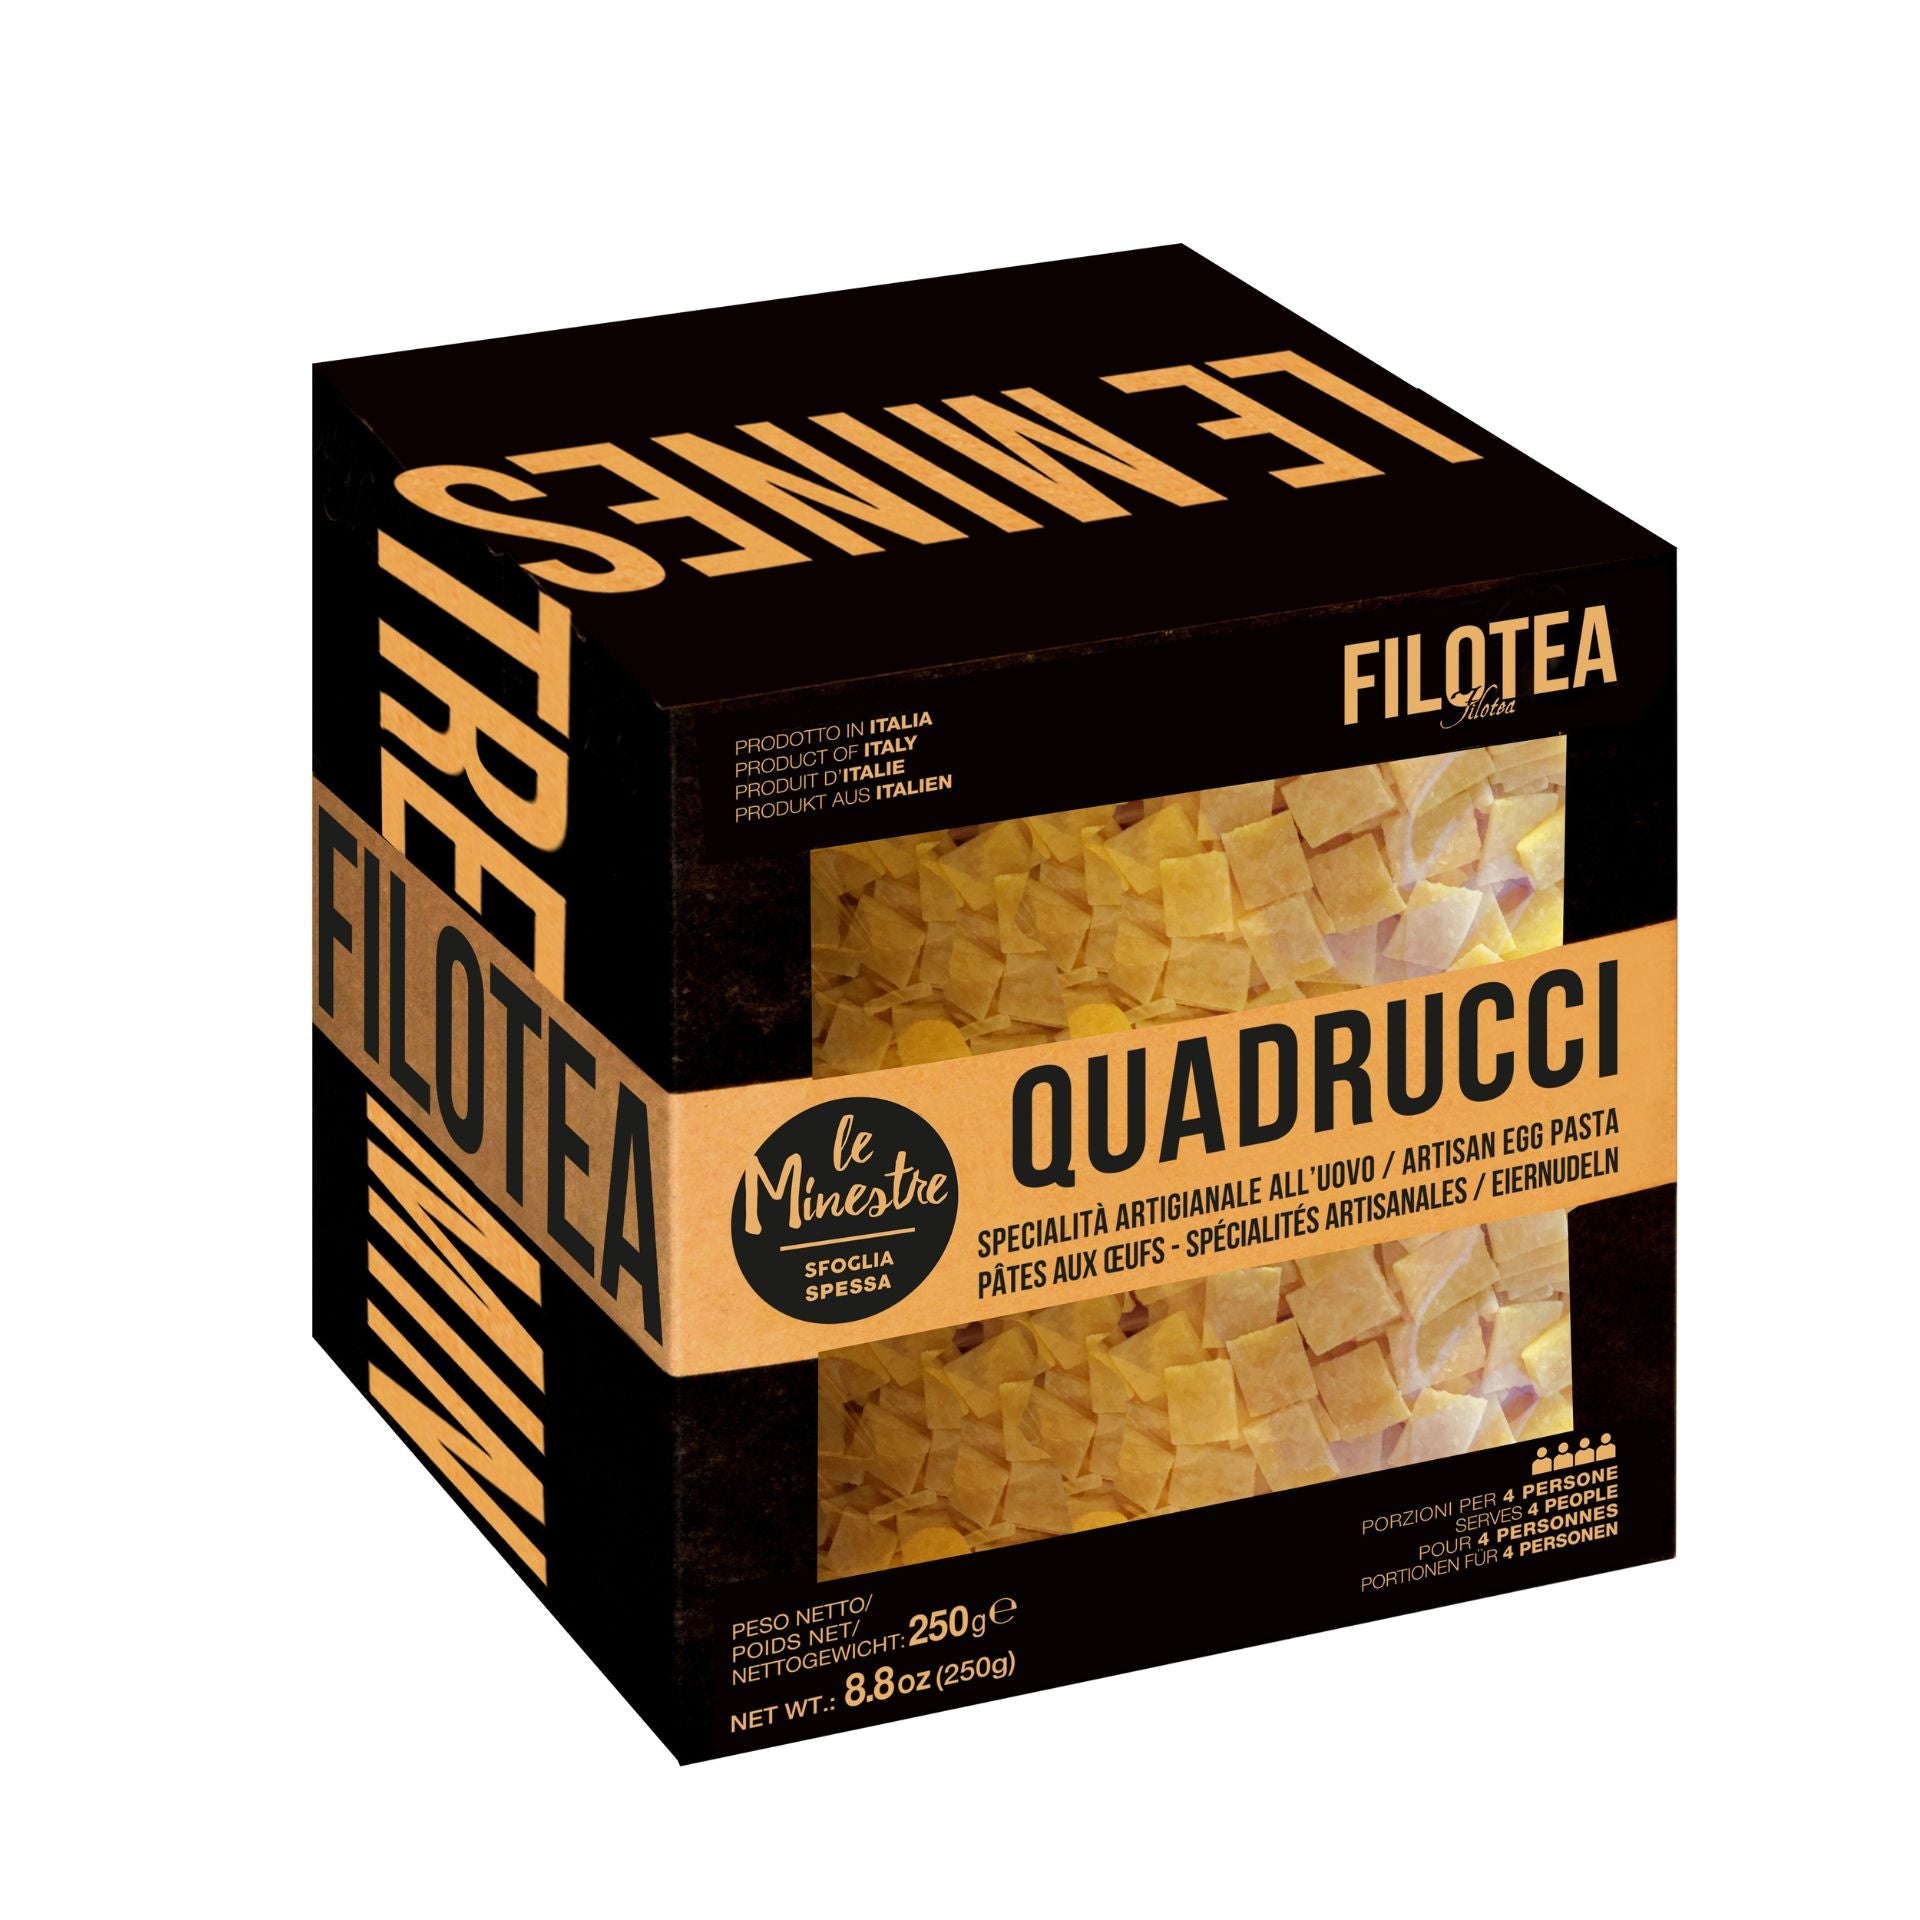 Filotea Quadrucci Tiny Egg Pasta 250g  | Imported and distributed in the UK by Just Gourmet Foods